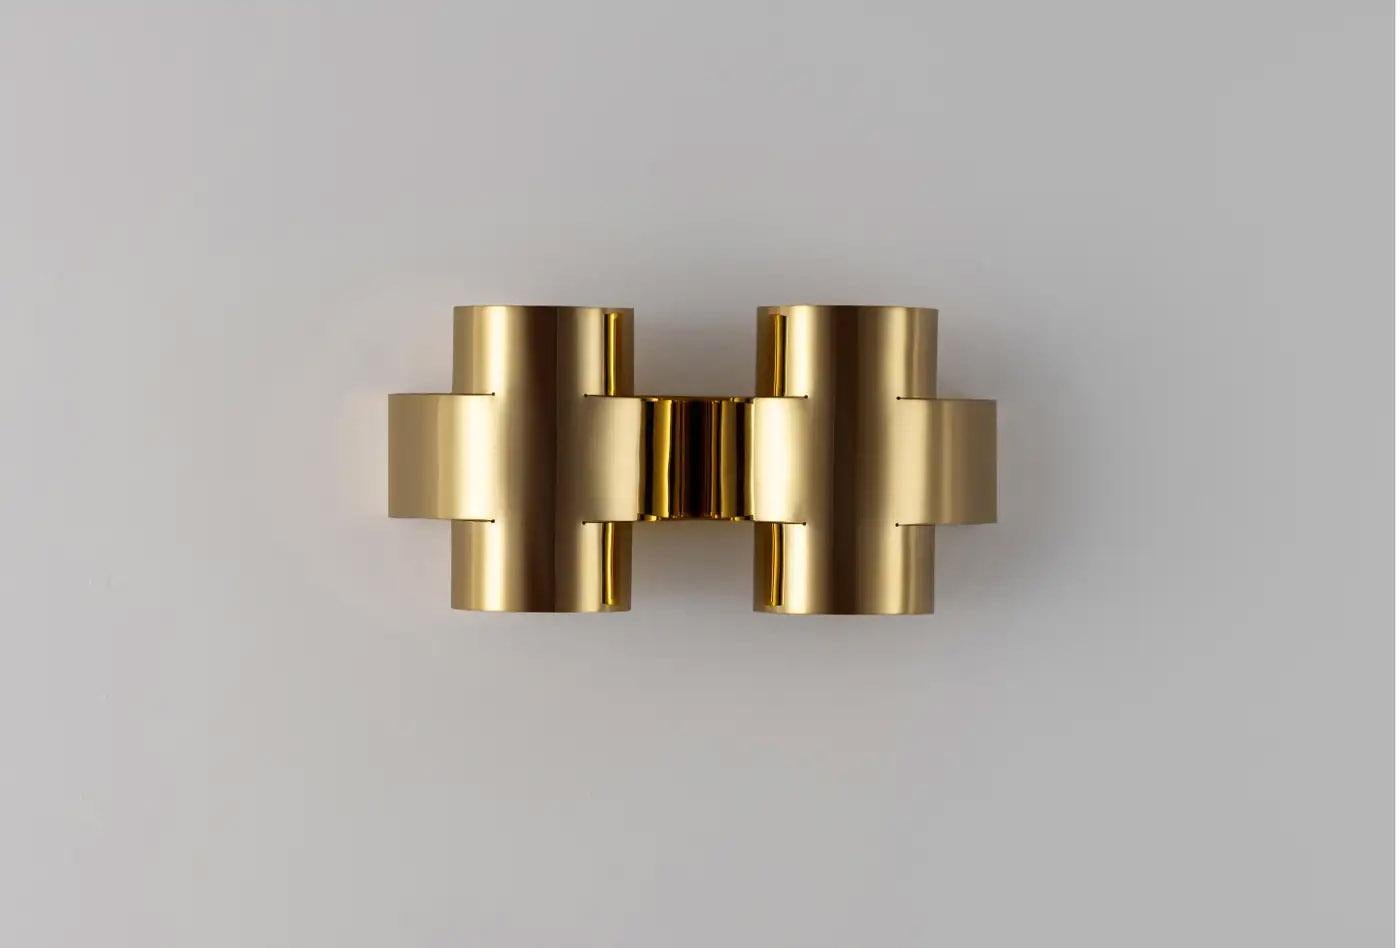 Contemporary Polished Brass Wall Sconce, Plus Two Large Lamp by Paul Matter

PLUS Series is a new range of appliqués by Paul Matter that feature a simple shape in singular and repetitive arrangements. A 3-Dimensional plus is formed out of a single